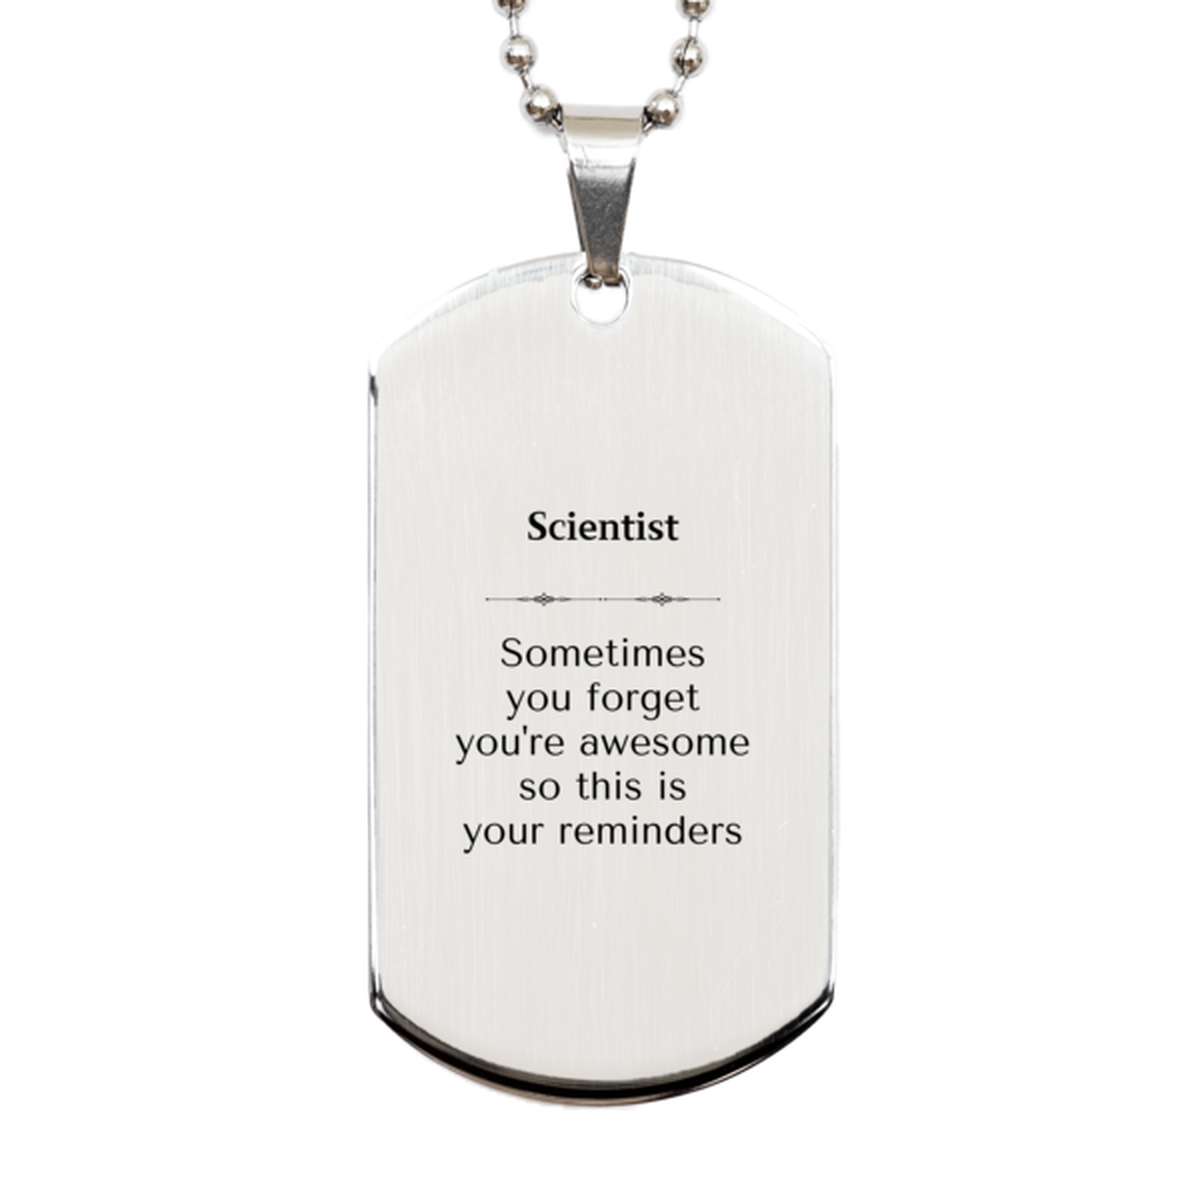 Sentimental Scientist Silver Dog Tag, Scientist Sometimes you forget you're awesome so this is your reminders, Graduation Christmas Birthday Gifts for Scientist, Men, Women, Coworkers